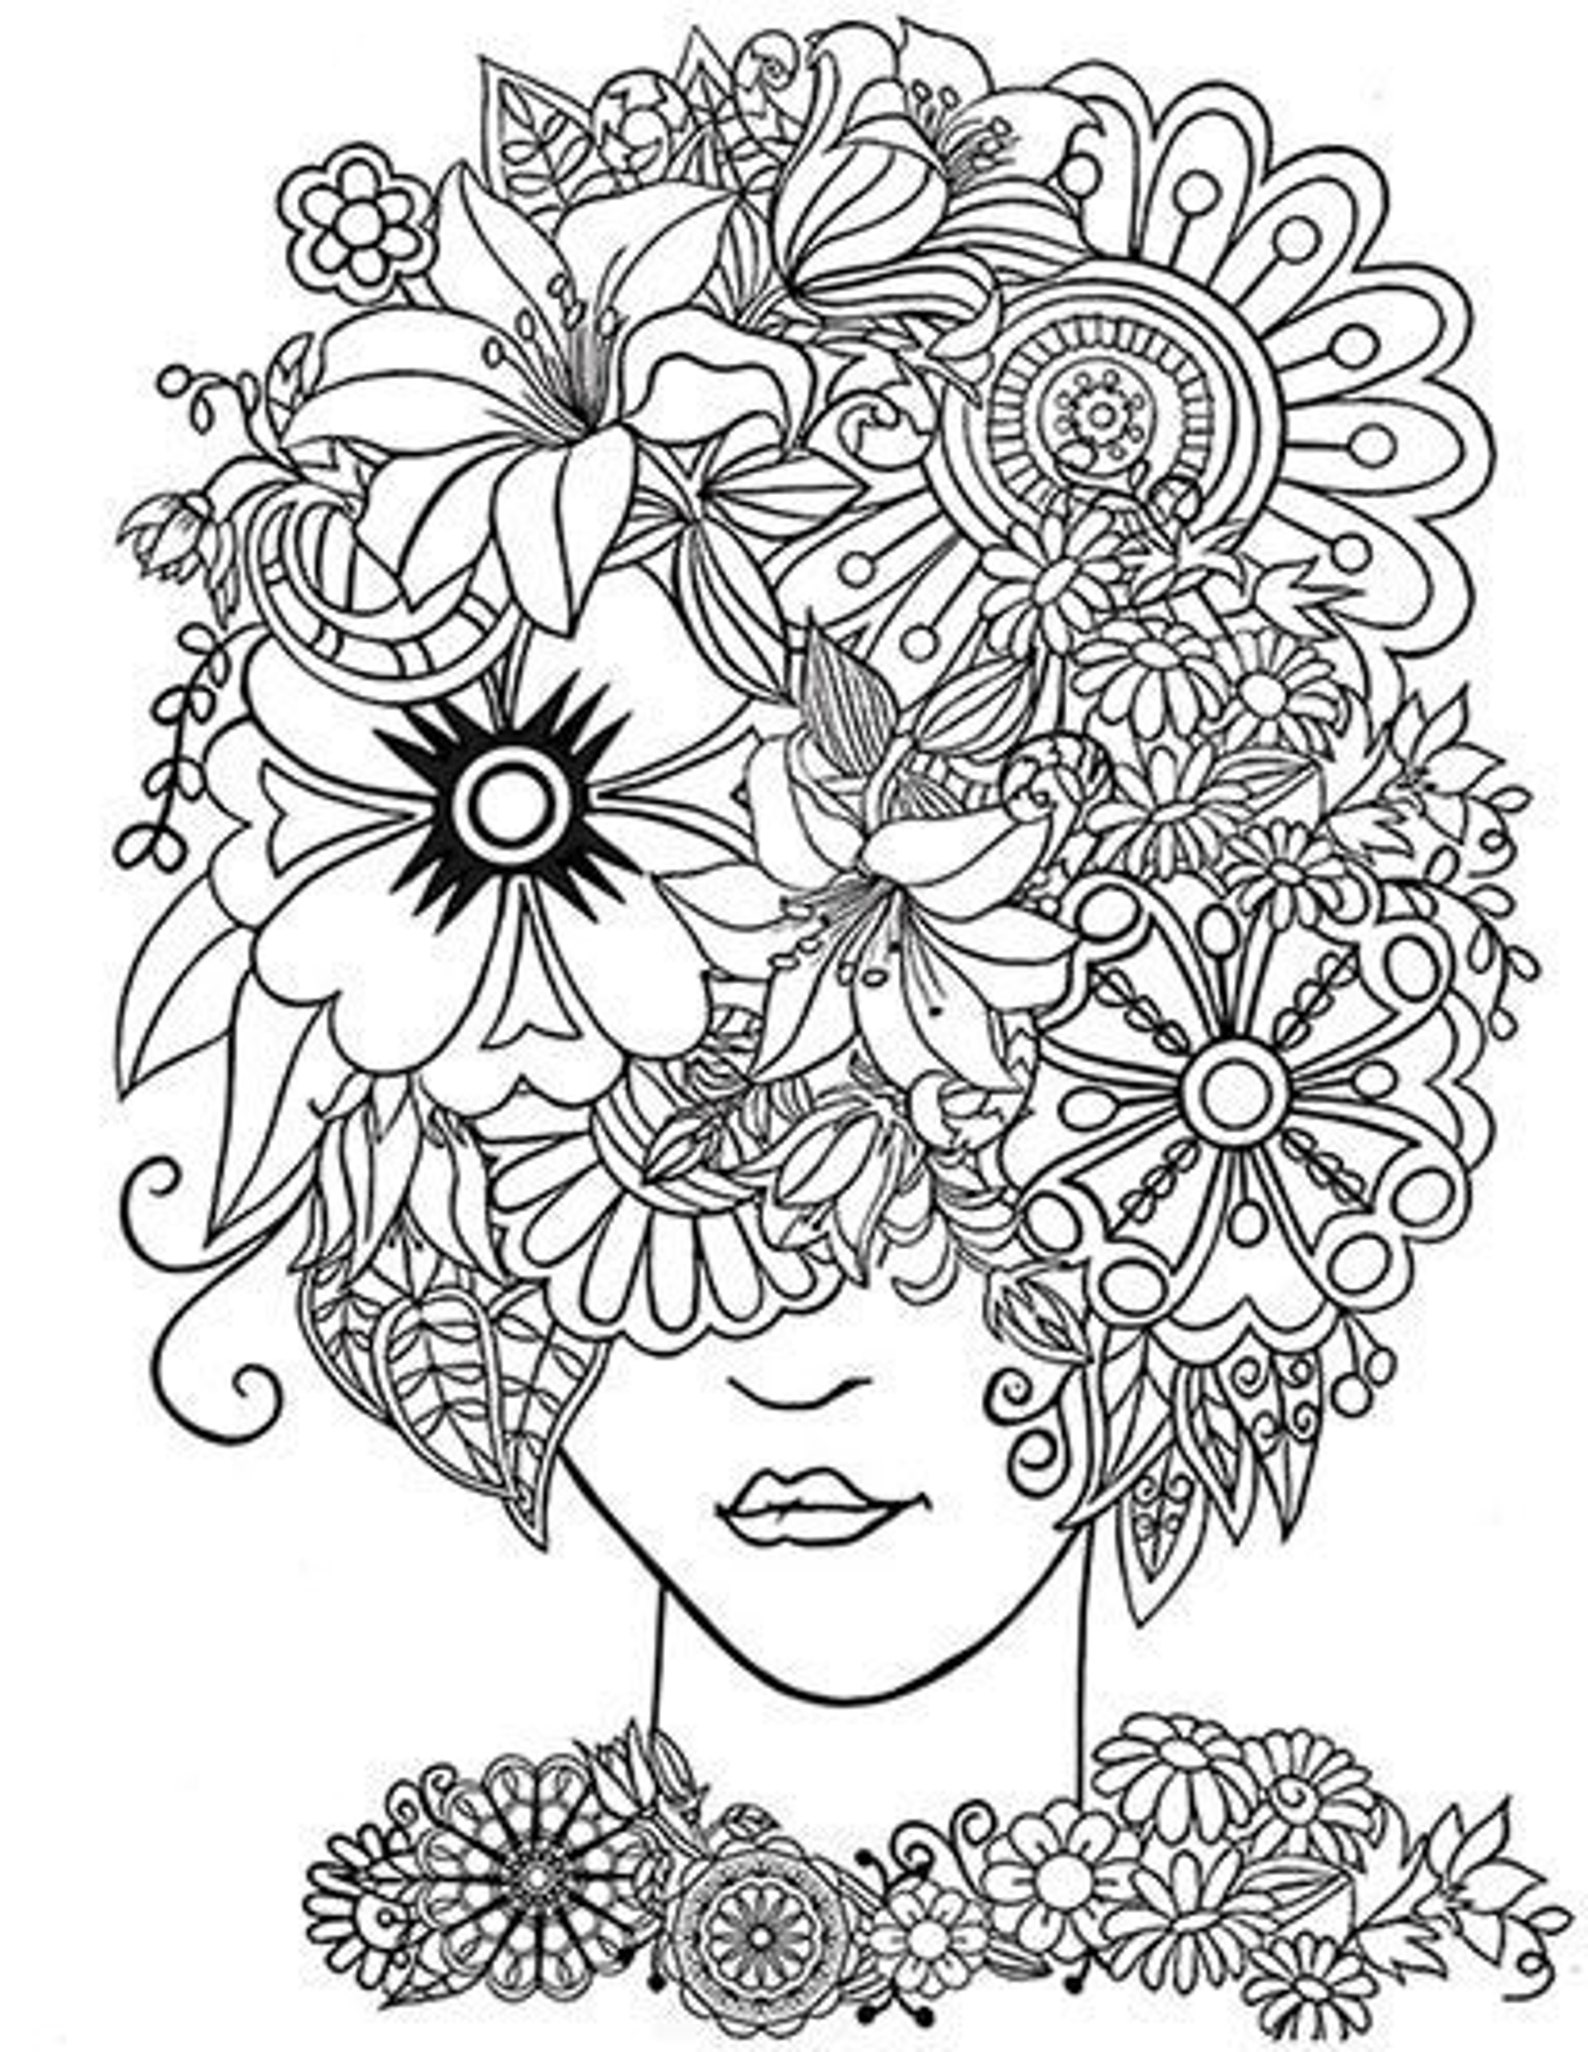 Coloring Pages Flowers Girl Flower Girl Coloring for | Etsy